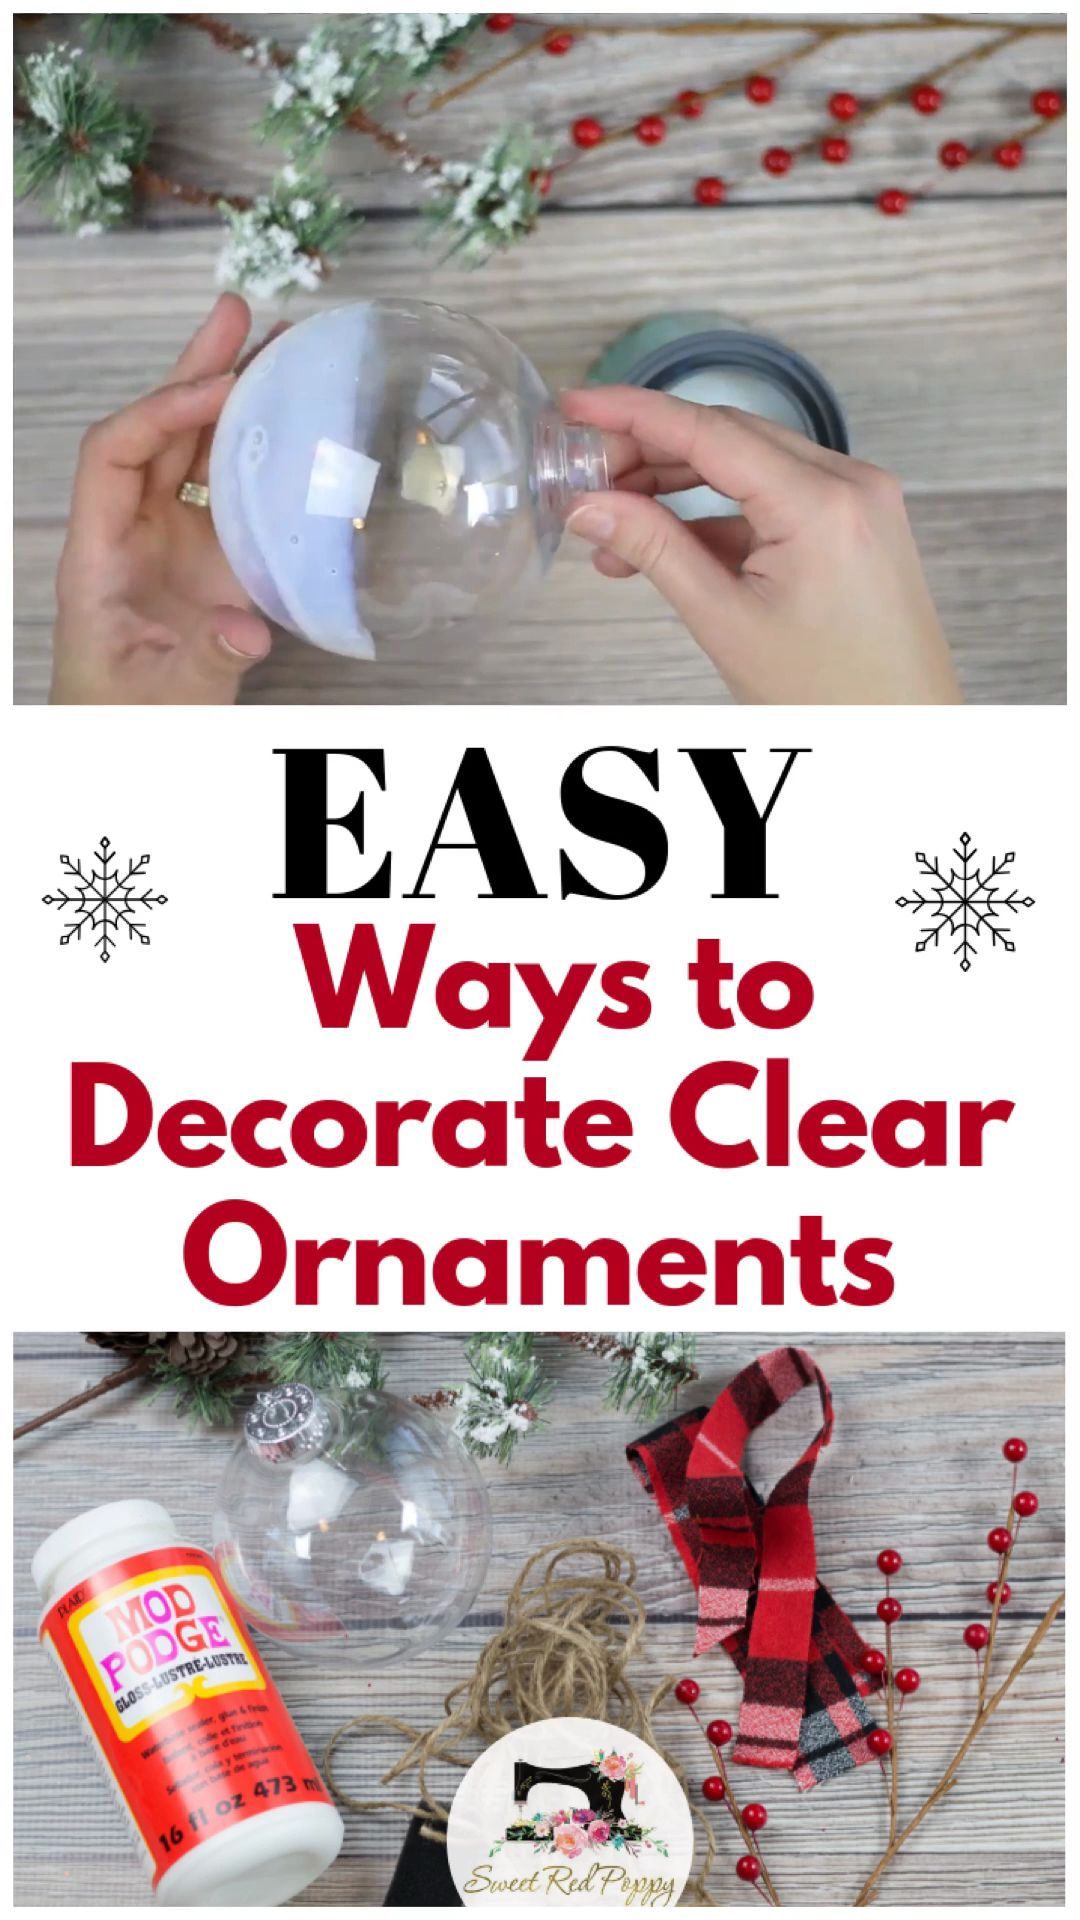 Easy Ways to Decorate Clear Plastic Ornaments for Christmas - Sweet Red Poppy - Easy Ways to Decorate Clear Plastic Ornaments for Christmas - Sweet Red Poppy -   19 diy Christmas room decor ideas